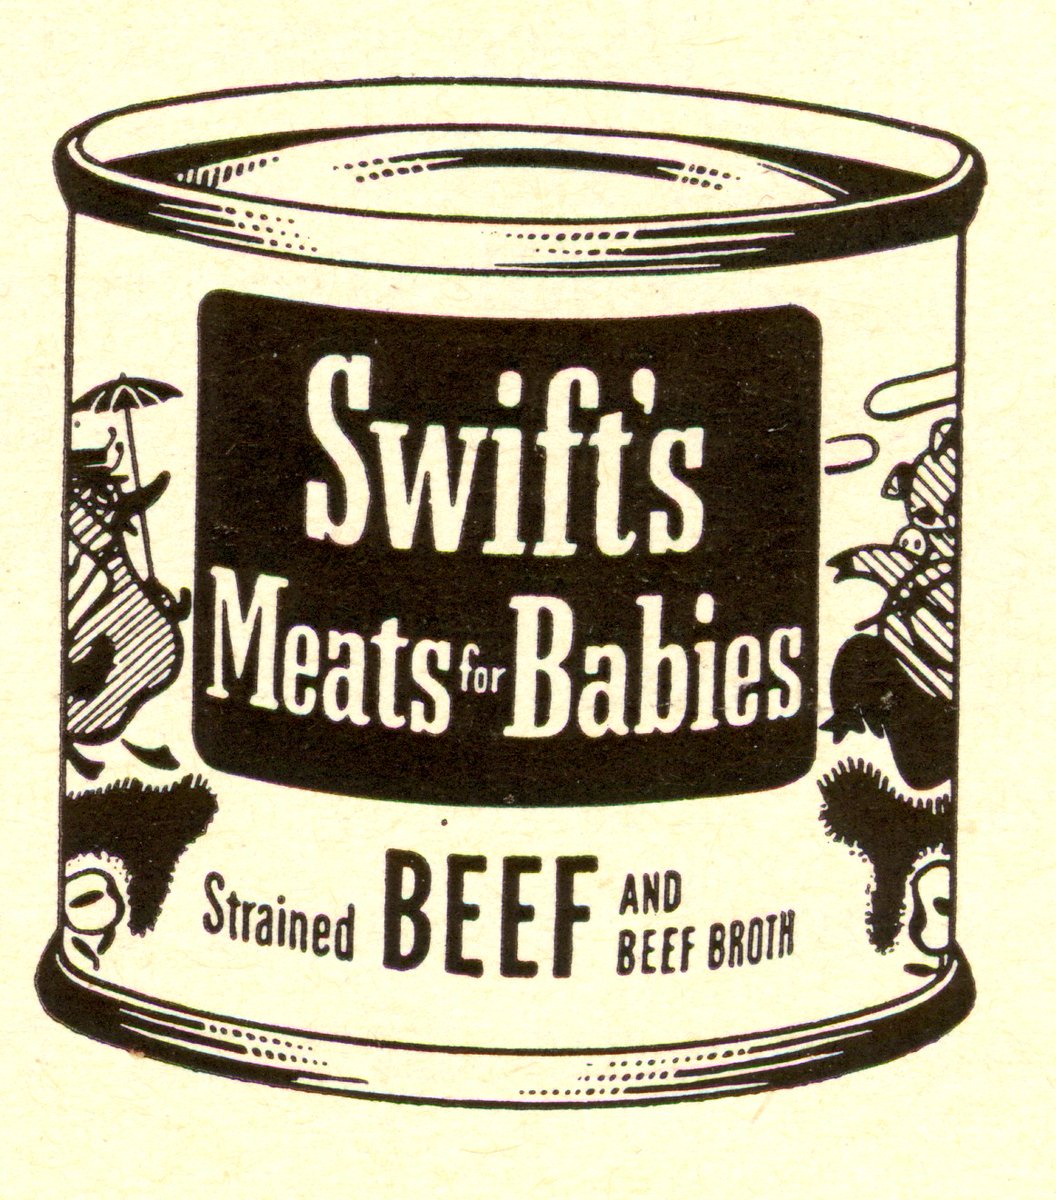 While picking up canned goods for surviving the Apocalypse, be sure to grab enough cans of *checks notes* Baby Meats! *checks notes again* I mean Meats For Babies! Which is totally normal and not made of babies!